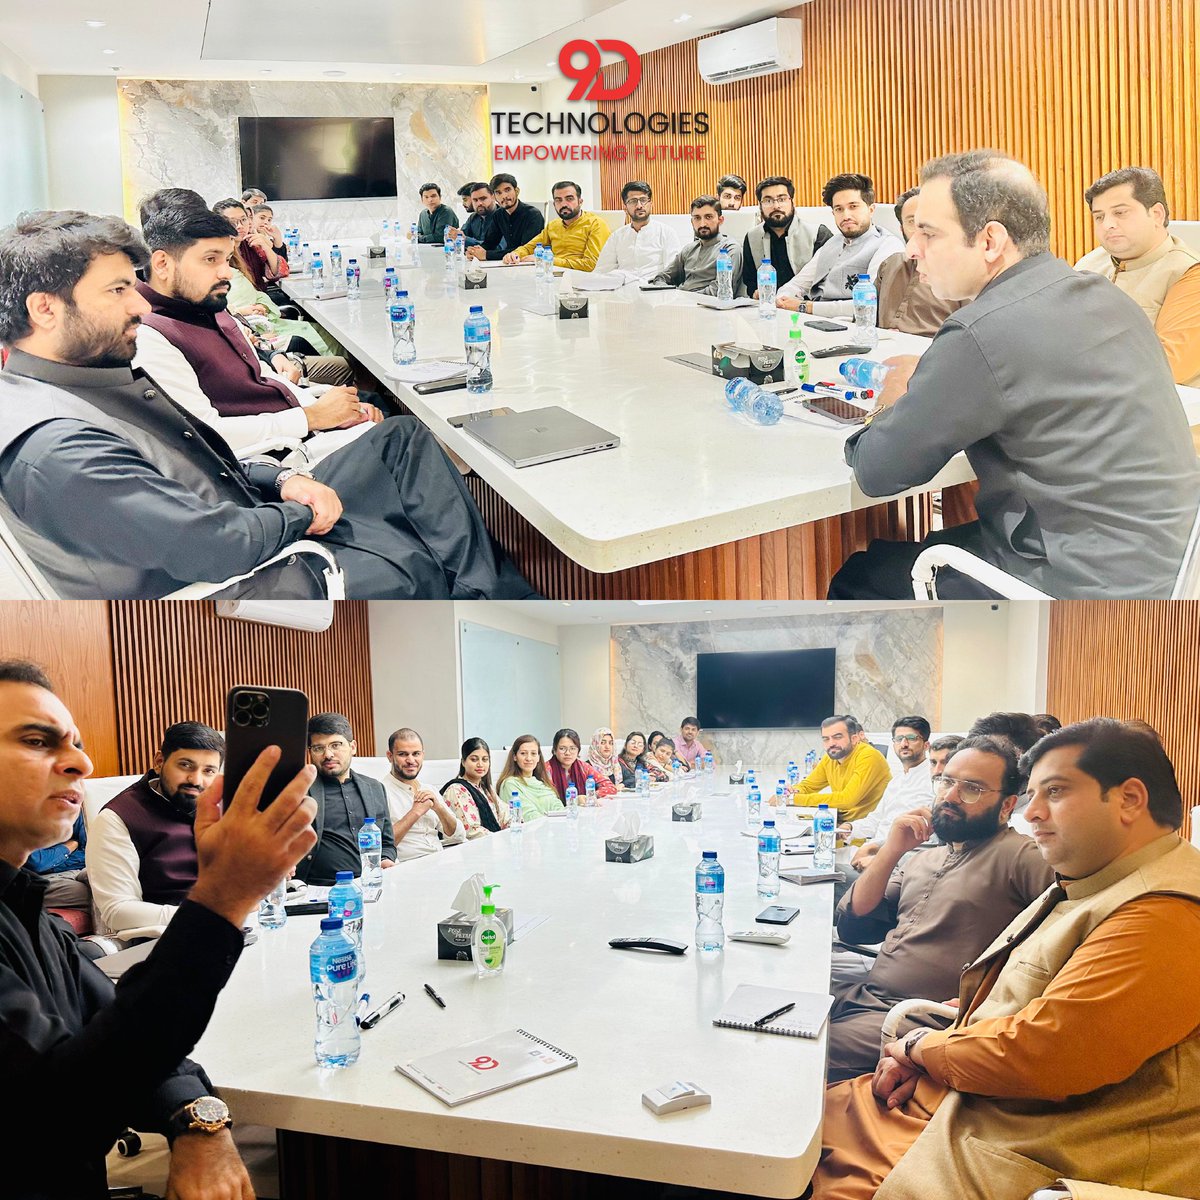 Qasim Ali Shah Inspires, we Aspire.

These pictures capture the transformative power of Qasim Ali Shah's motivational sessions at 9D Technologies. ✨

#QasimAliShah #MotivationInPictures #InspirationUnleashed #WisdomInAction #TransformativeMoments #9dtechnologies #9d